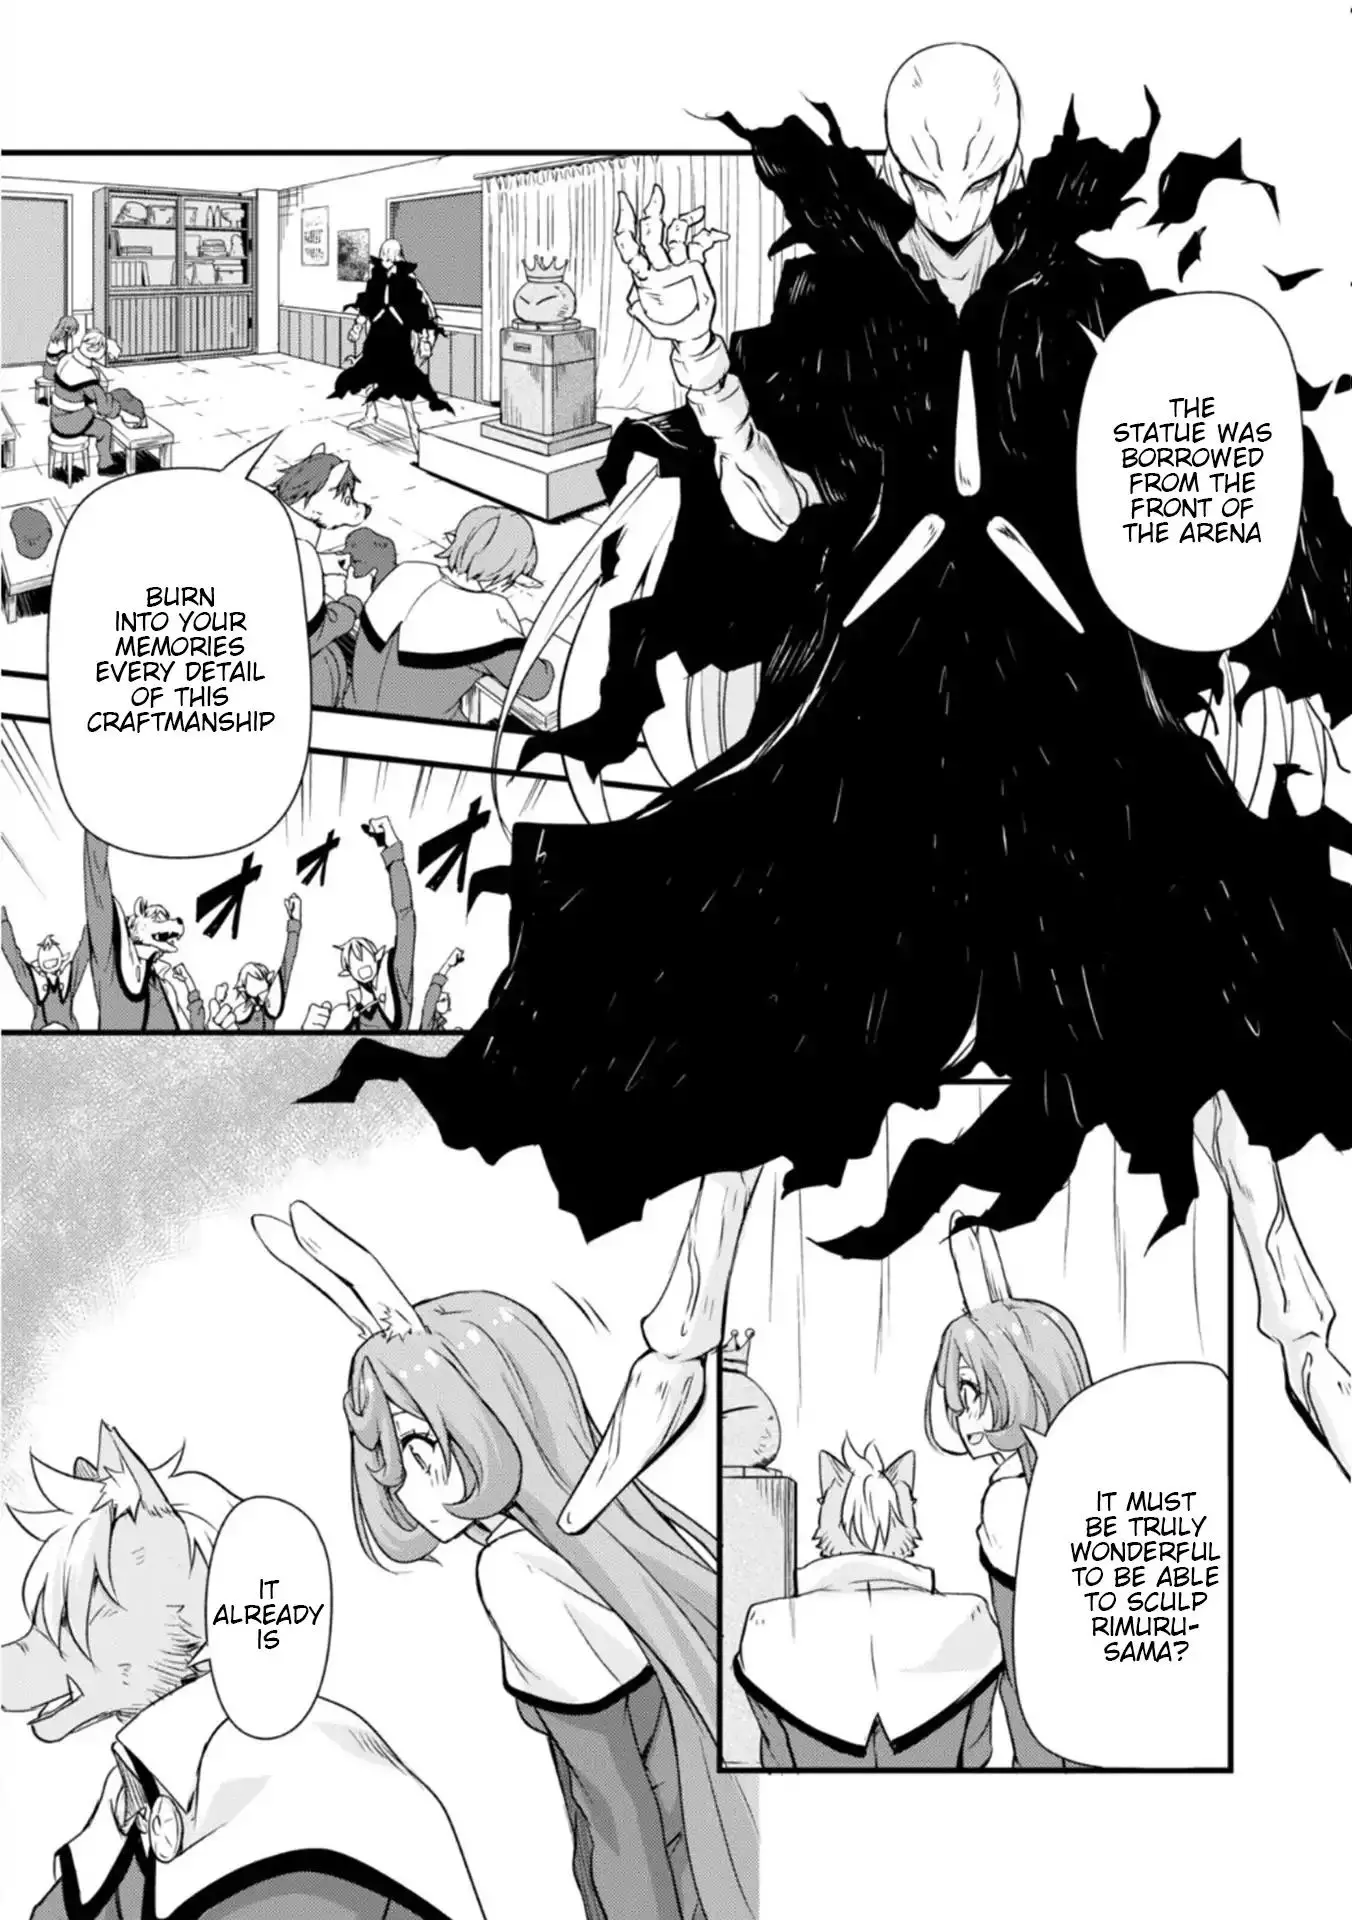 Tensei Shitara Slime Datta Ken: The Ways of Strolling in the Demon Country - 20 page 16